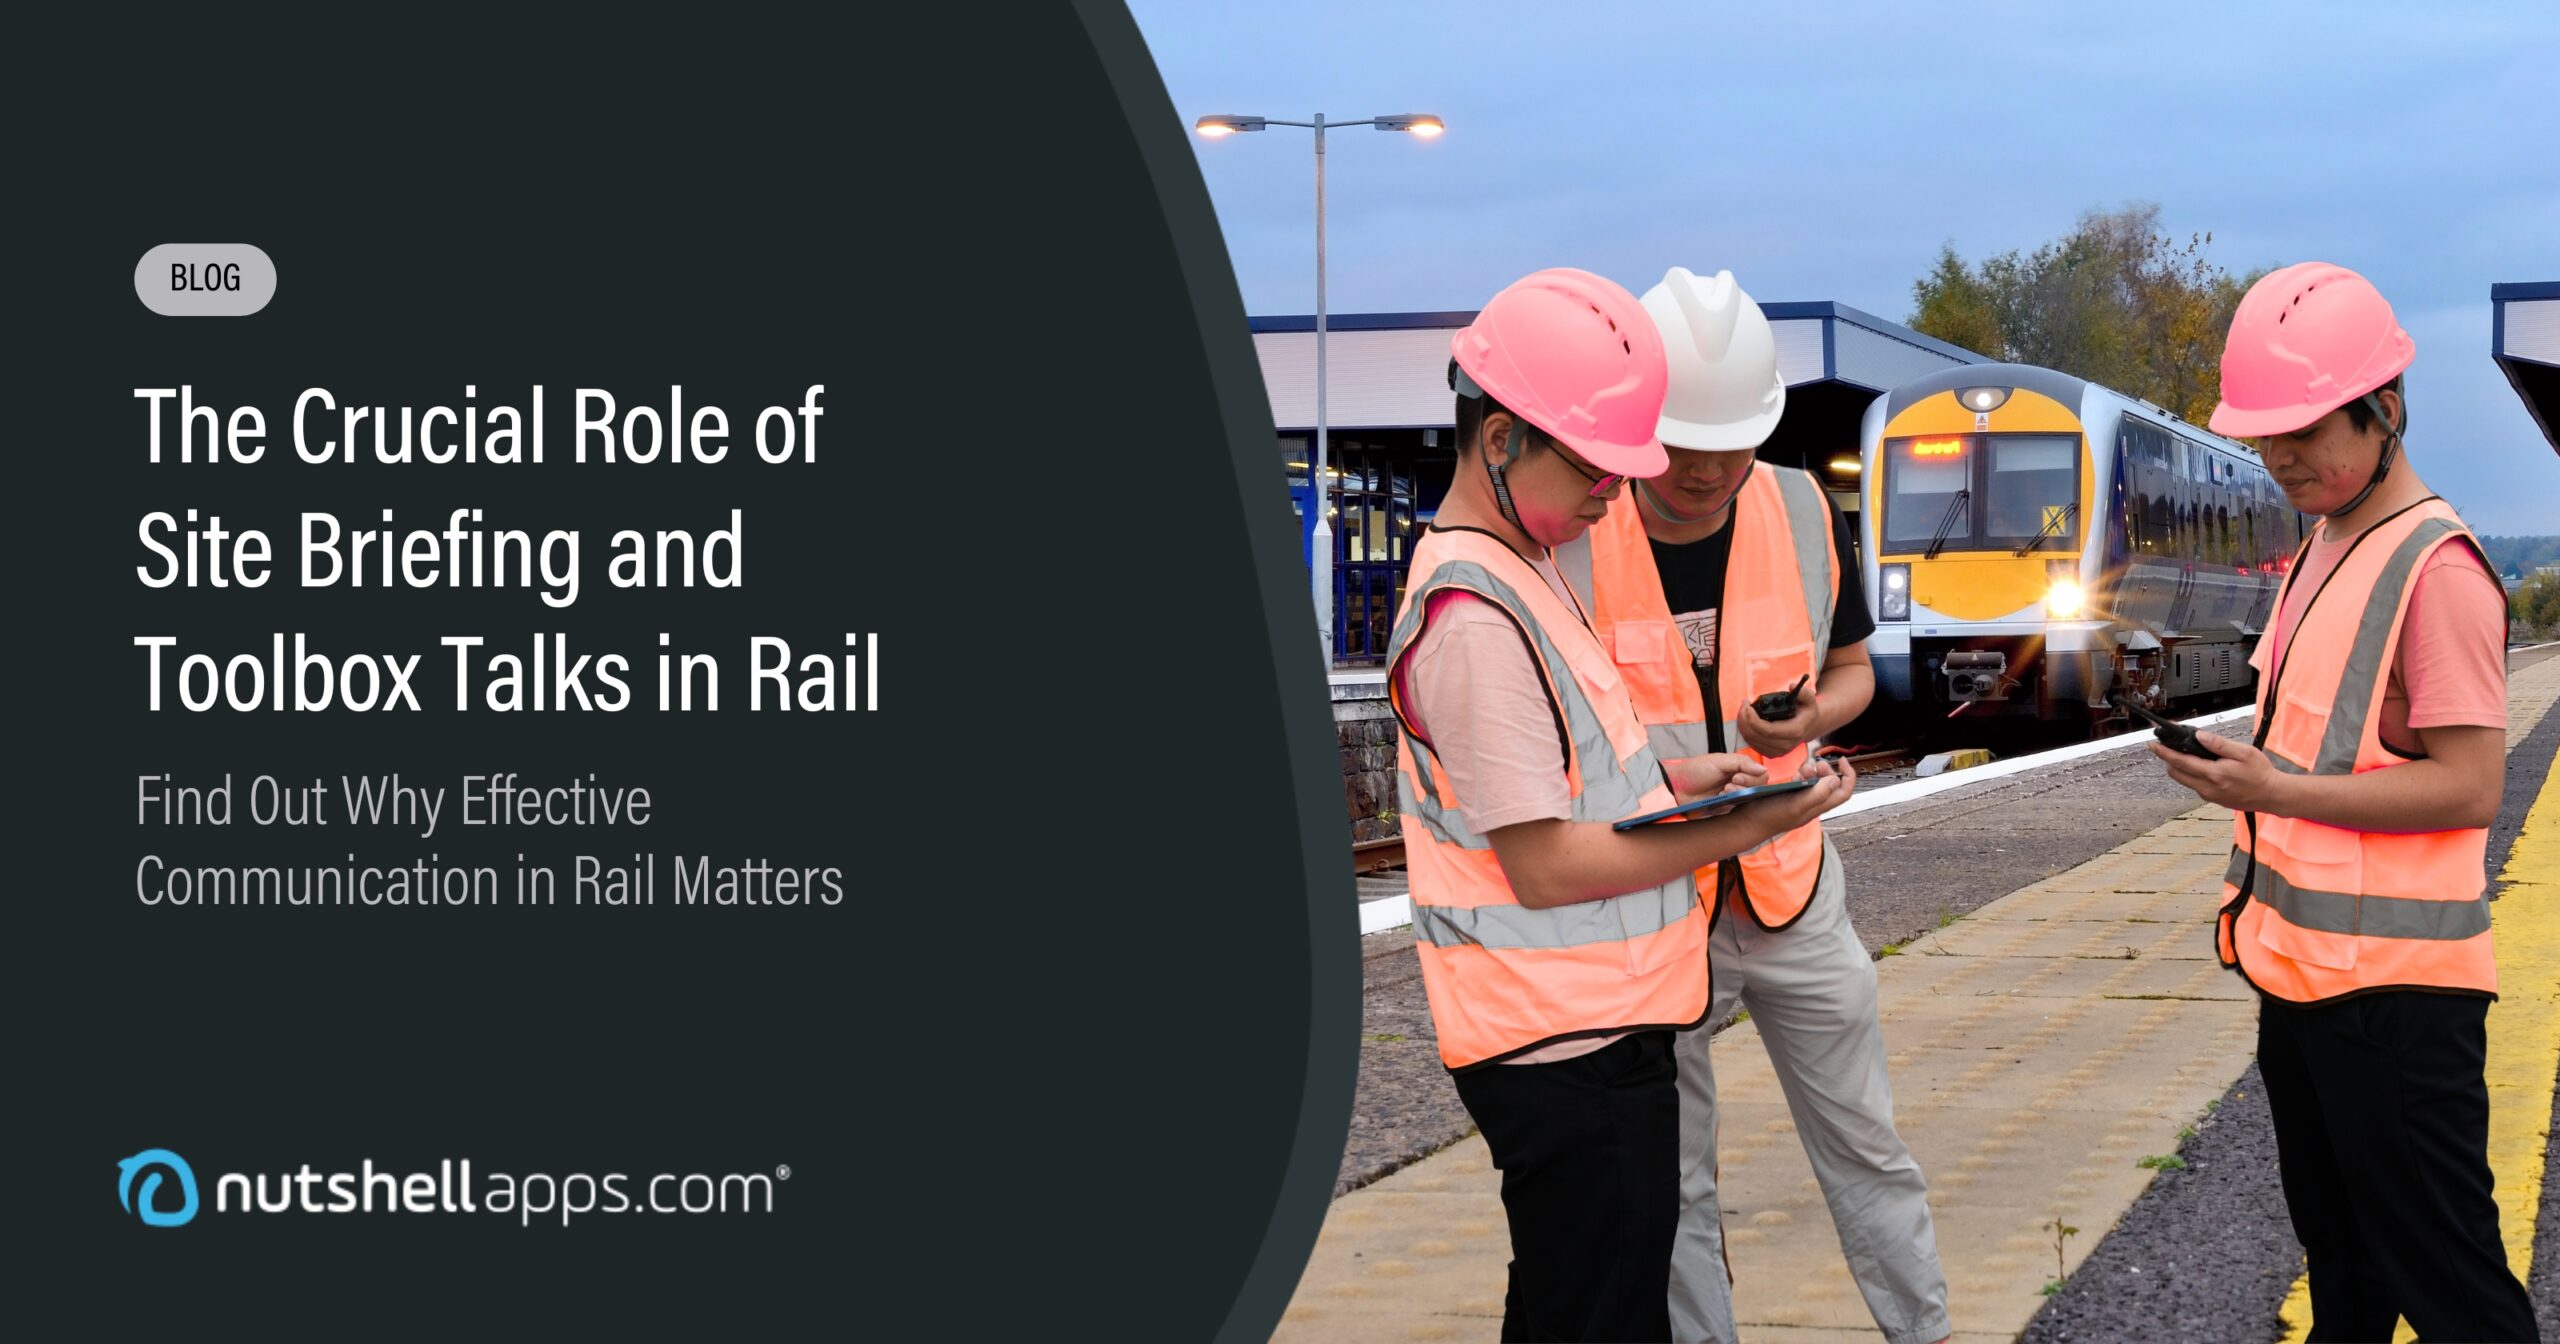 Blog | The Crucial Role of Site Briefing and Toolbox Talks in Rail Industry